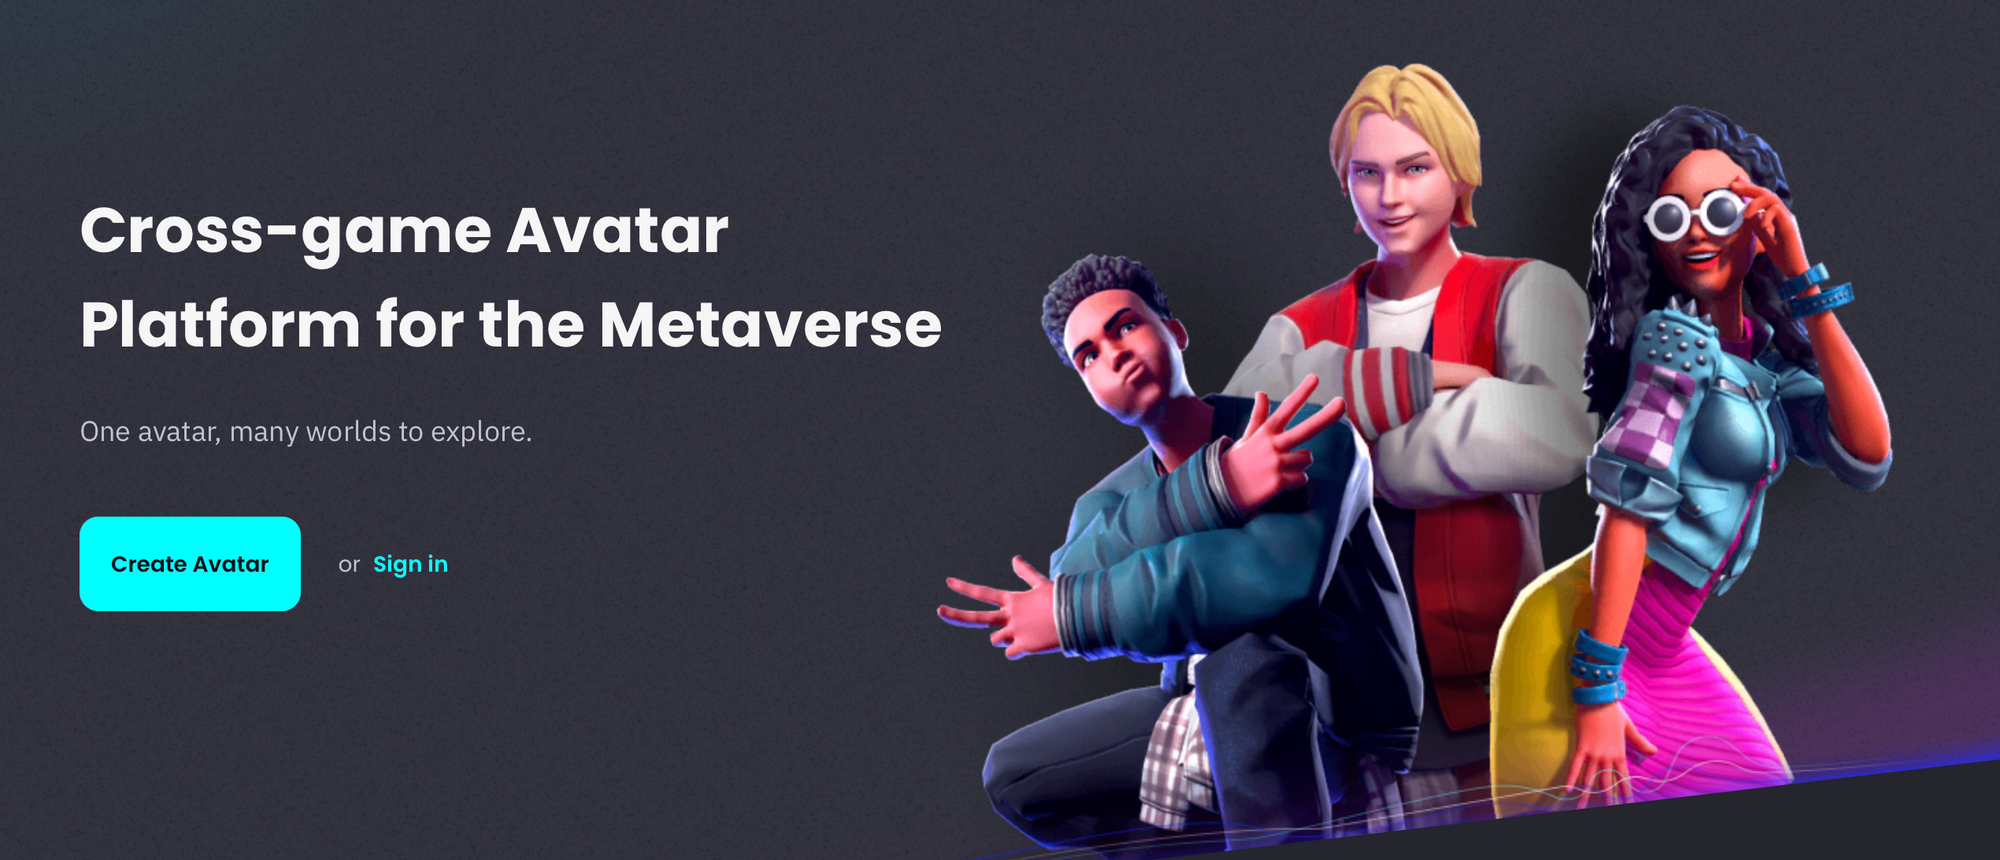 Evolutions: Avatars in the Metaverse